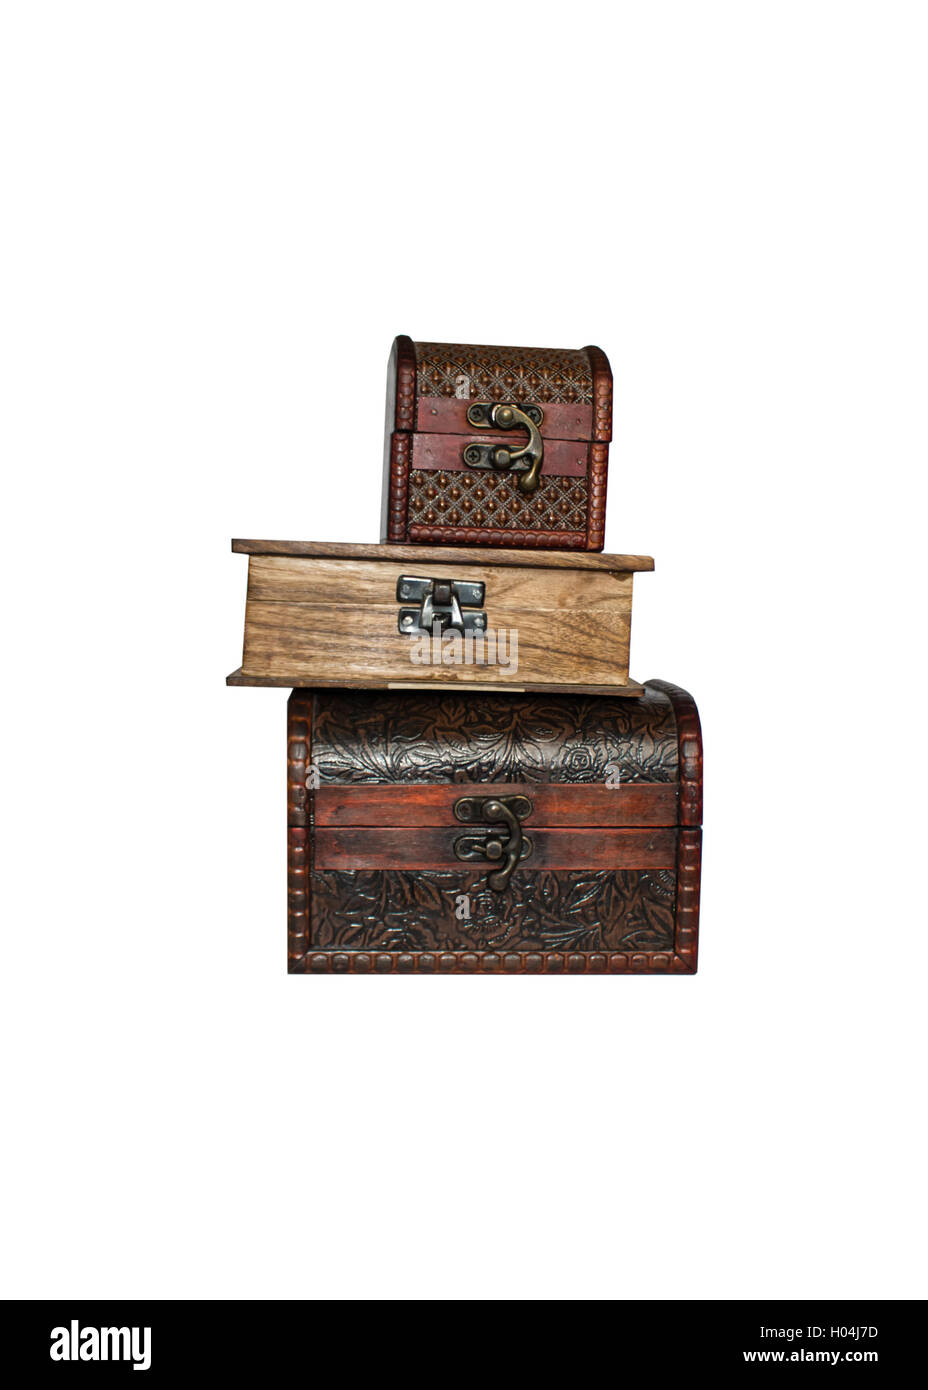 Antique wooden chest isolated on white background. Stock Photo